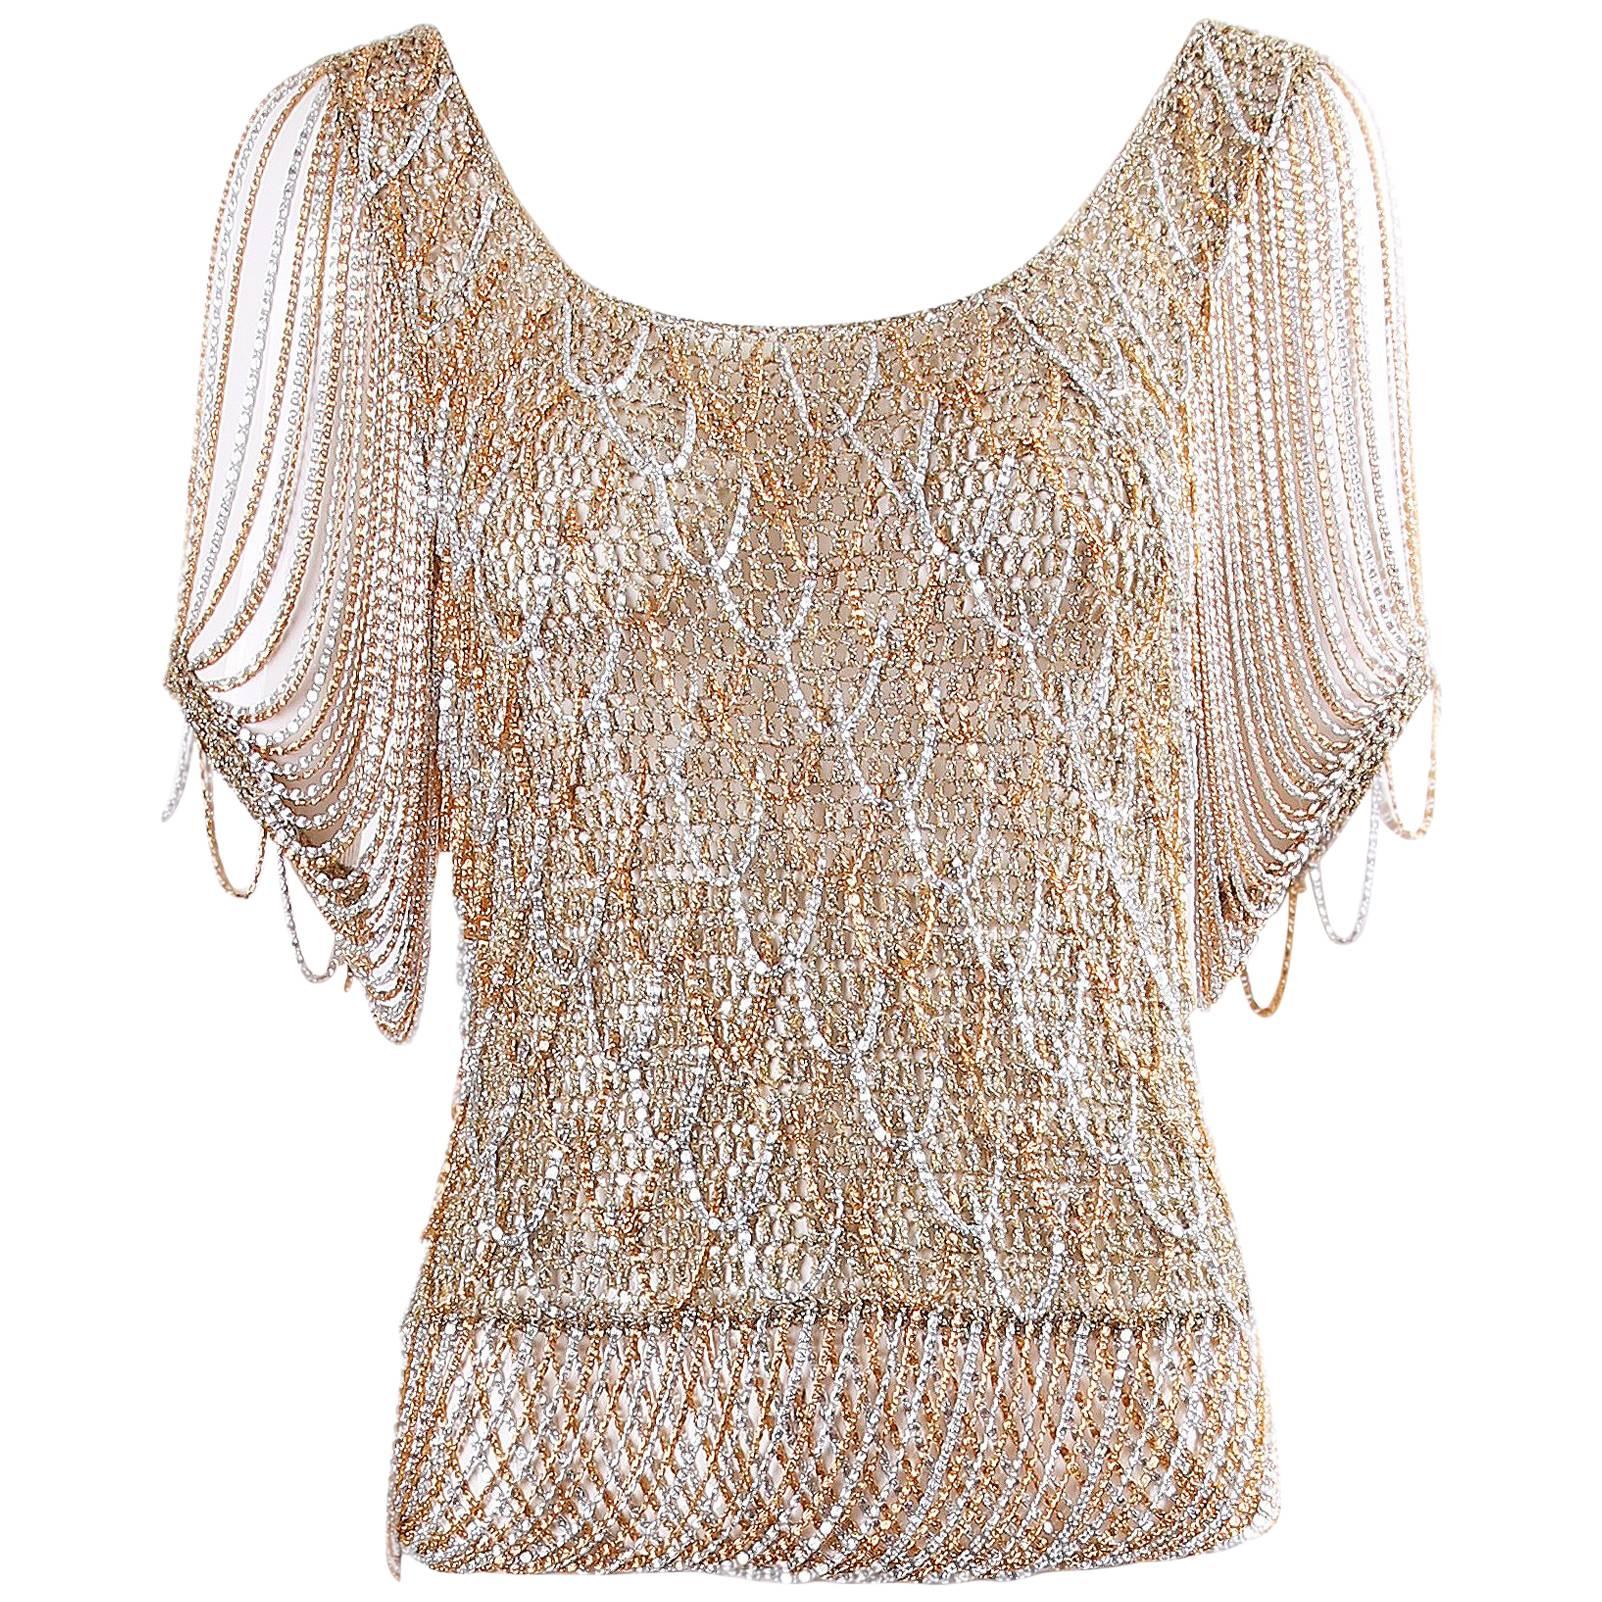 Loris Azzaro Gold and Silver Knit Lurex and Chain Top, 1970s 